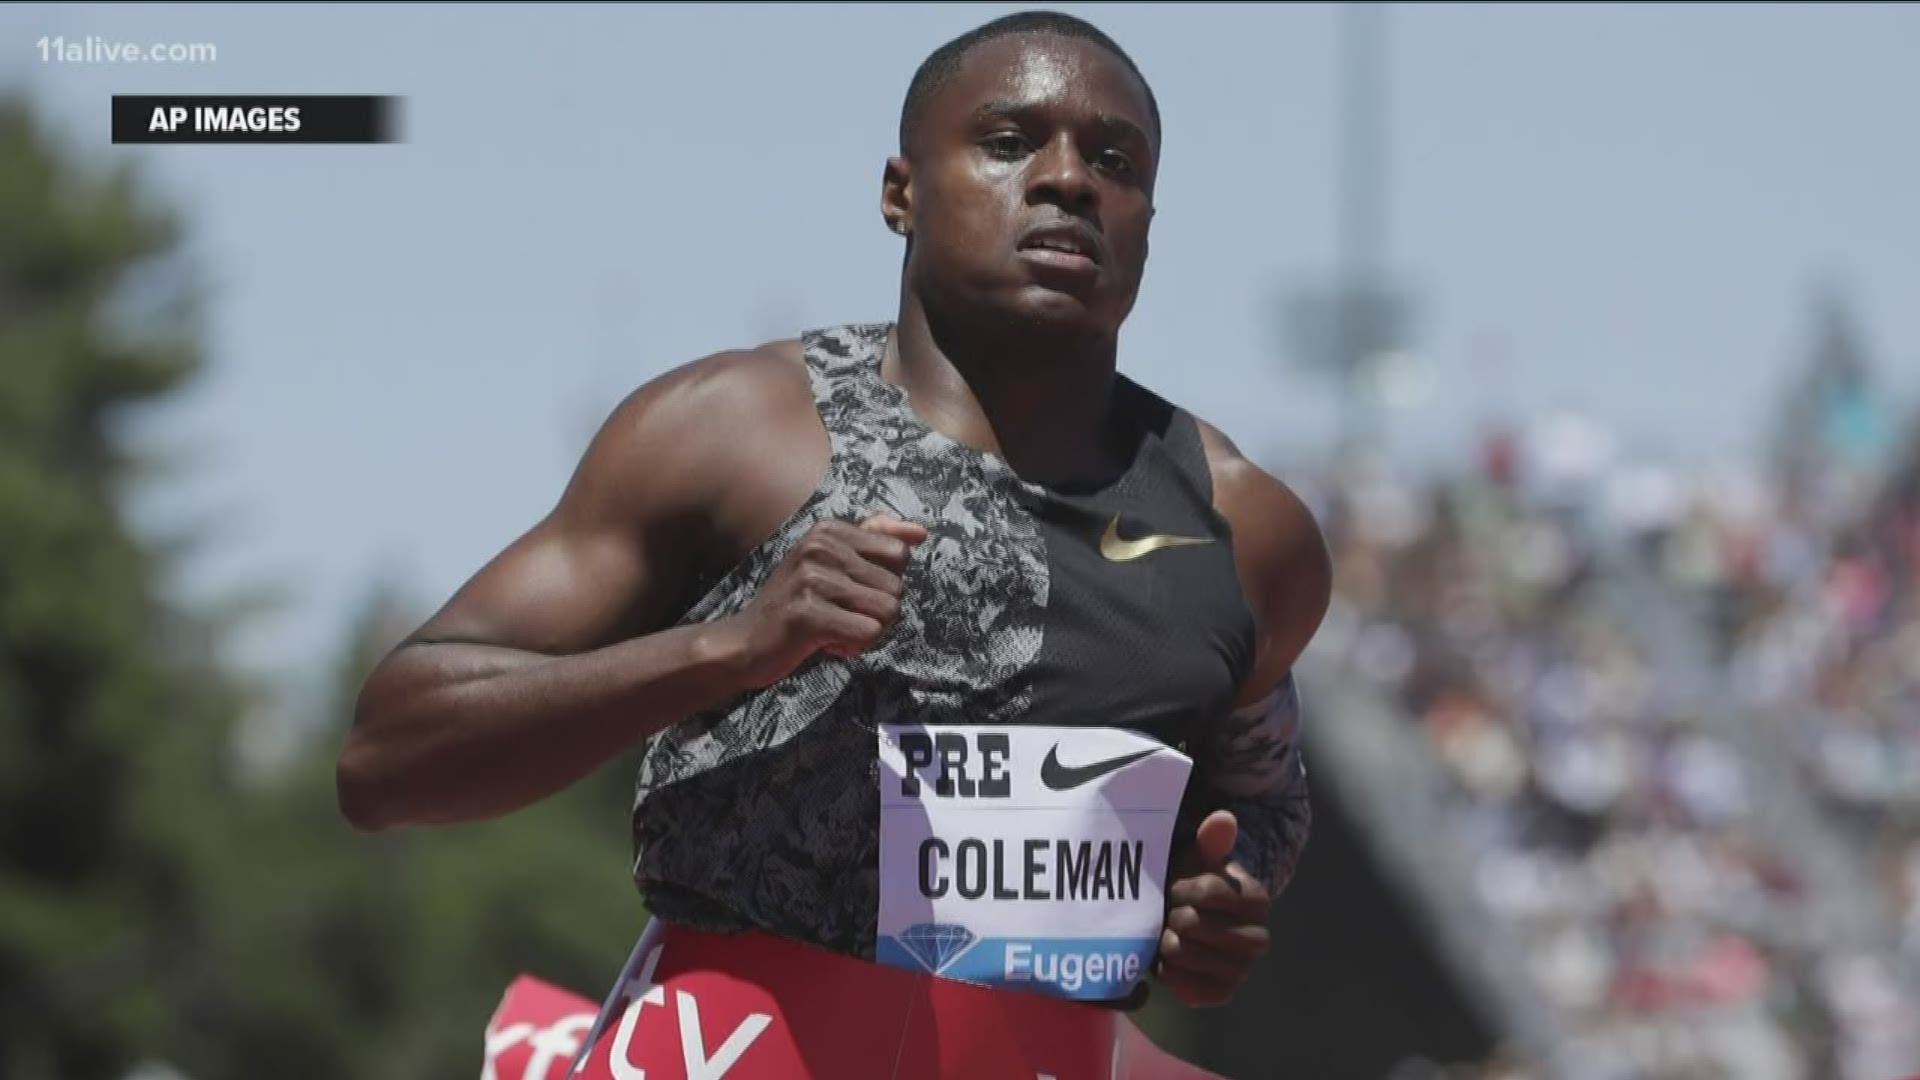 Gold-medal sprint contender Christian Coleman's Olympic prospects might be in jeopardy after three missed drug tests, two people familiar with the case told The Associated Press.